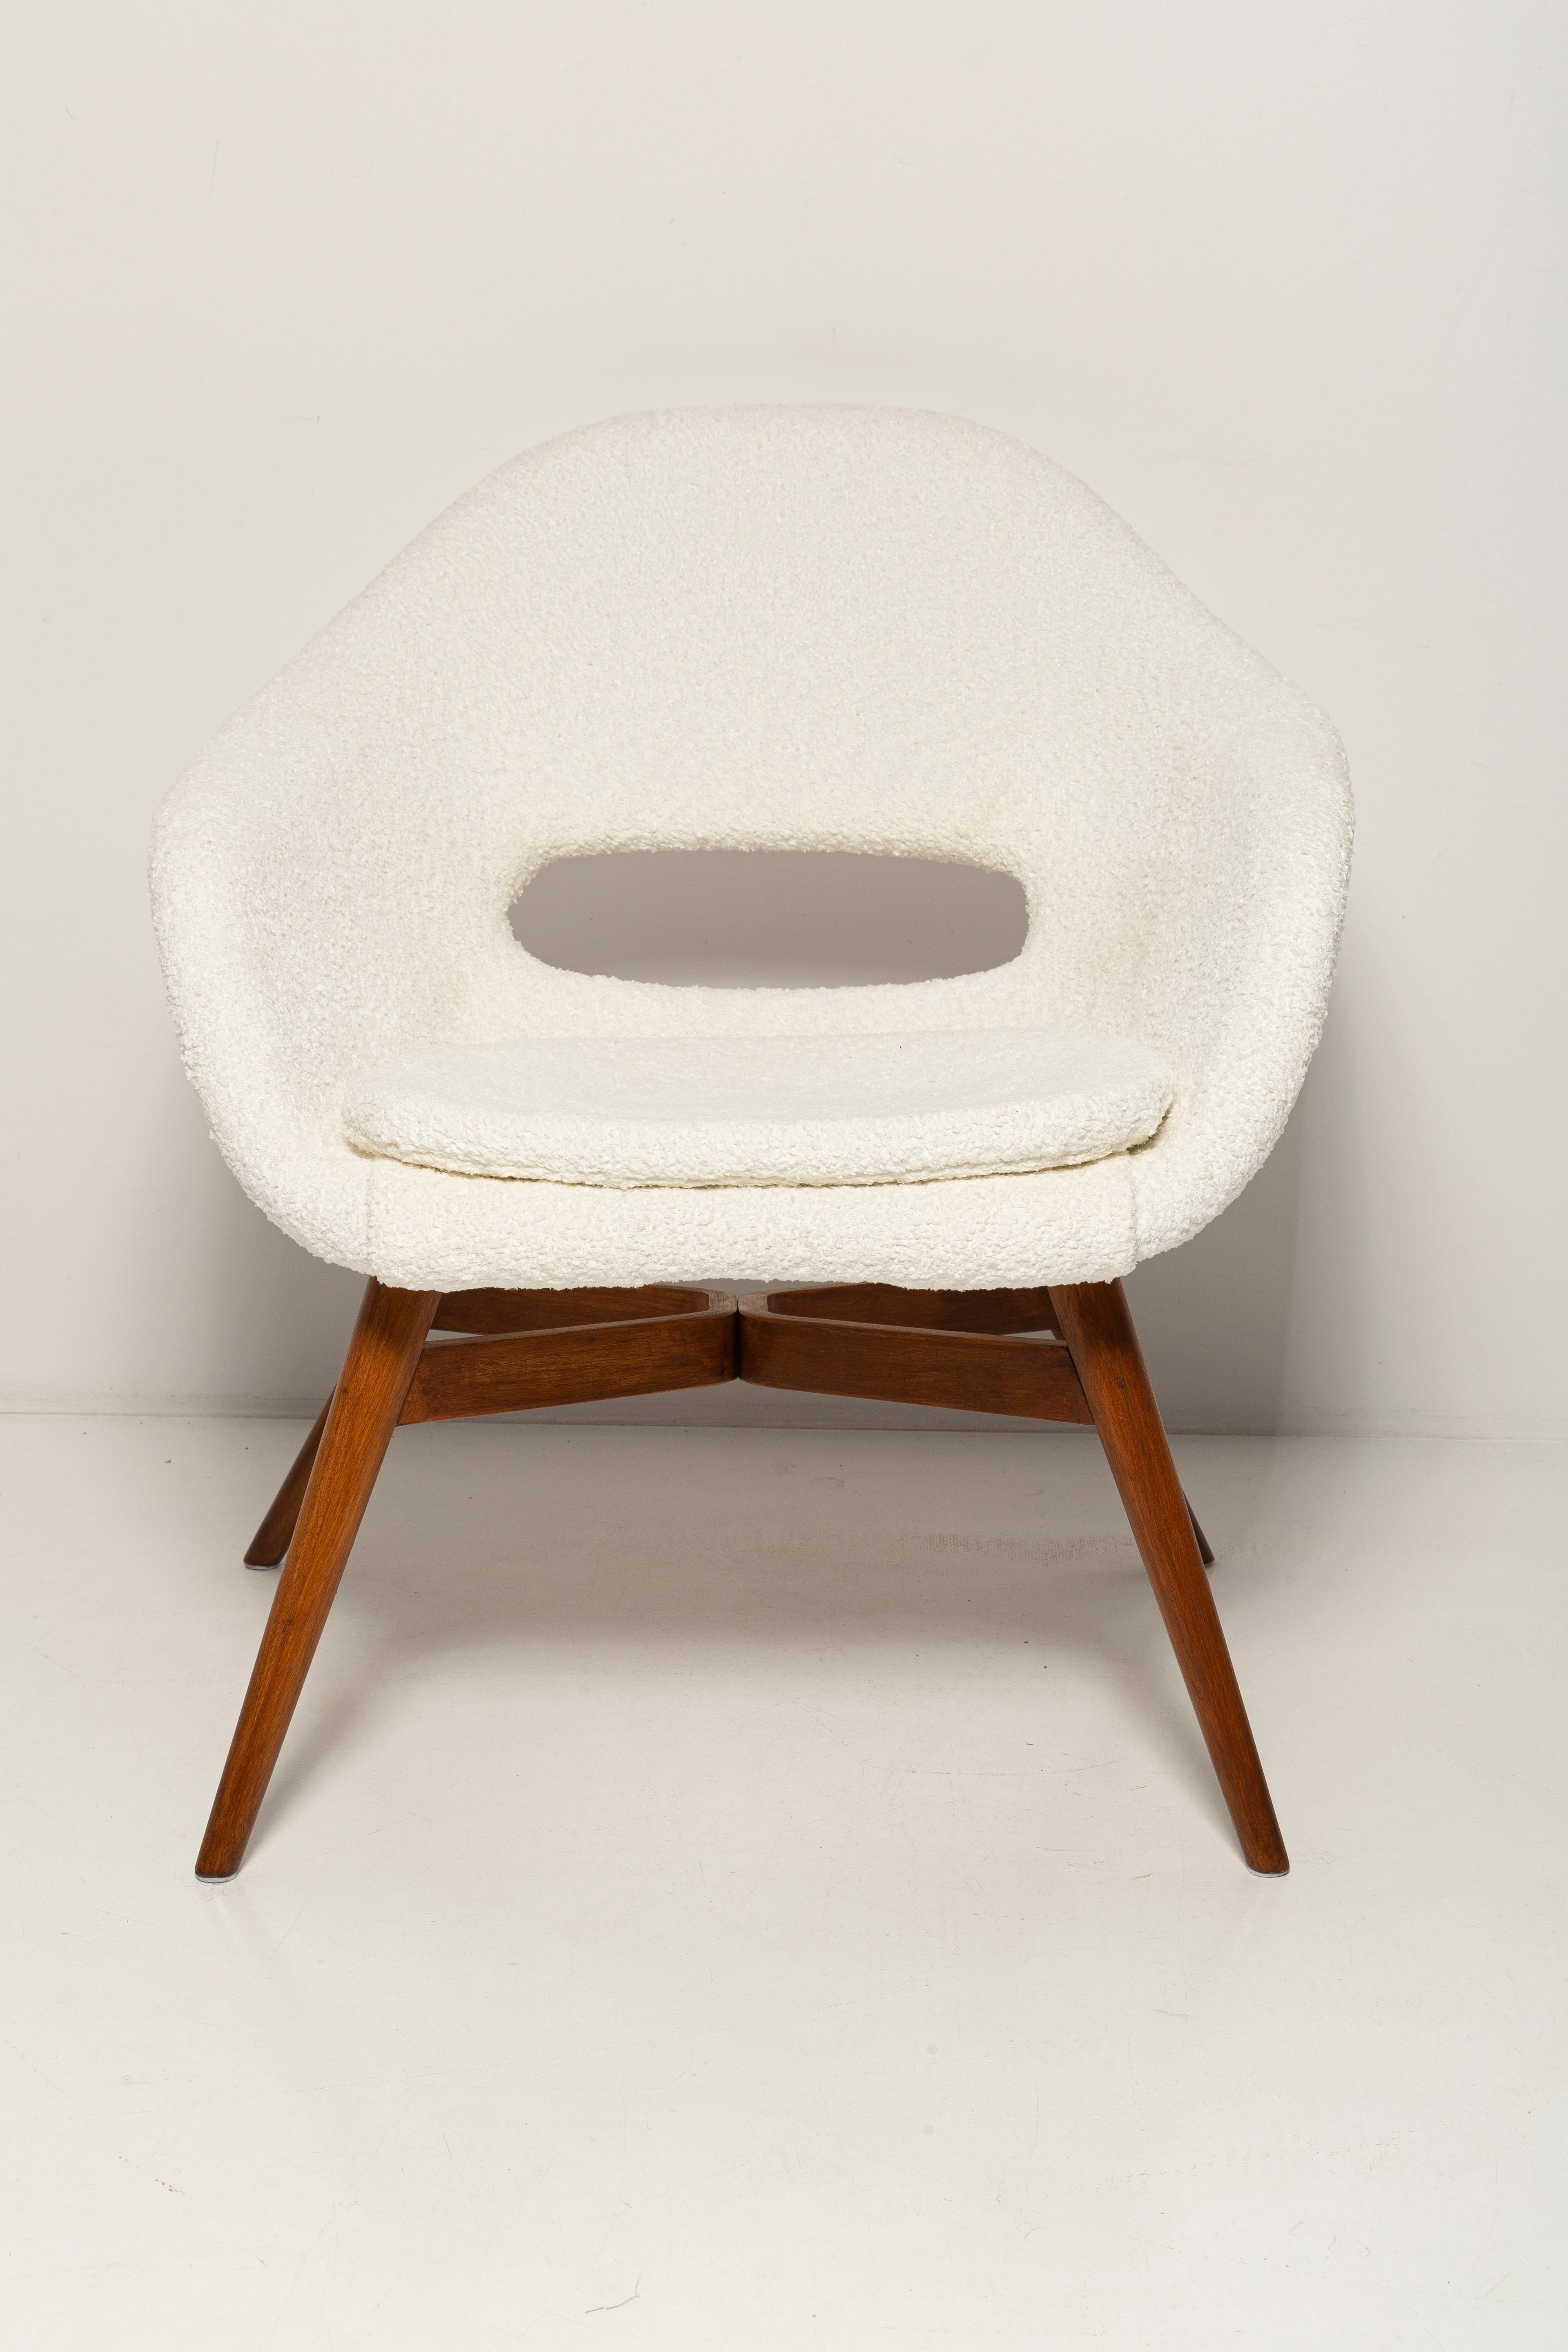 Fabric Set of 2 Mid Century White Boucle Shell Chairs, M Navratil, Czechoslovakia, 1960 For Sale